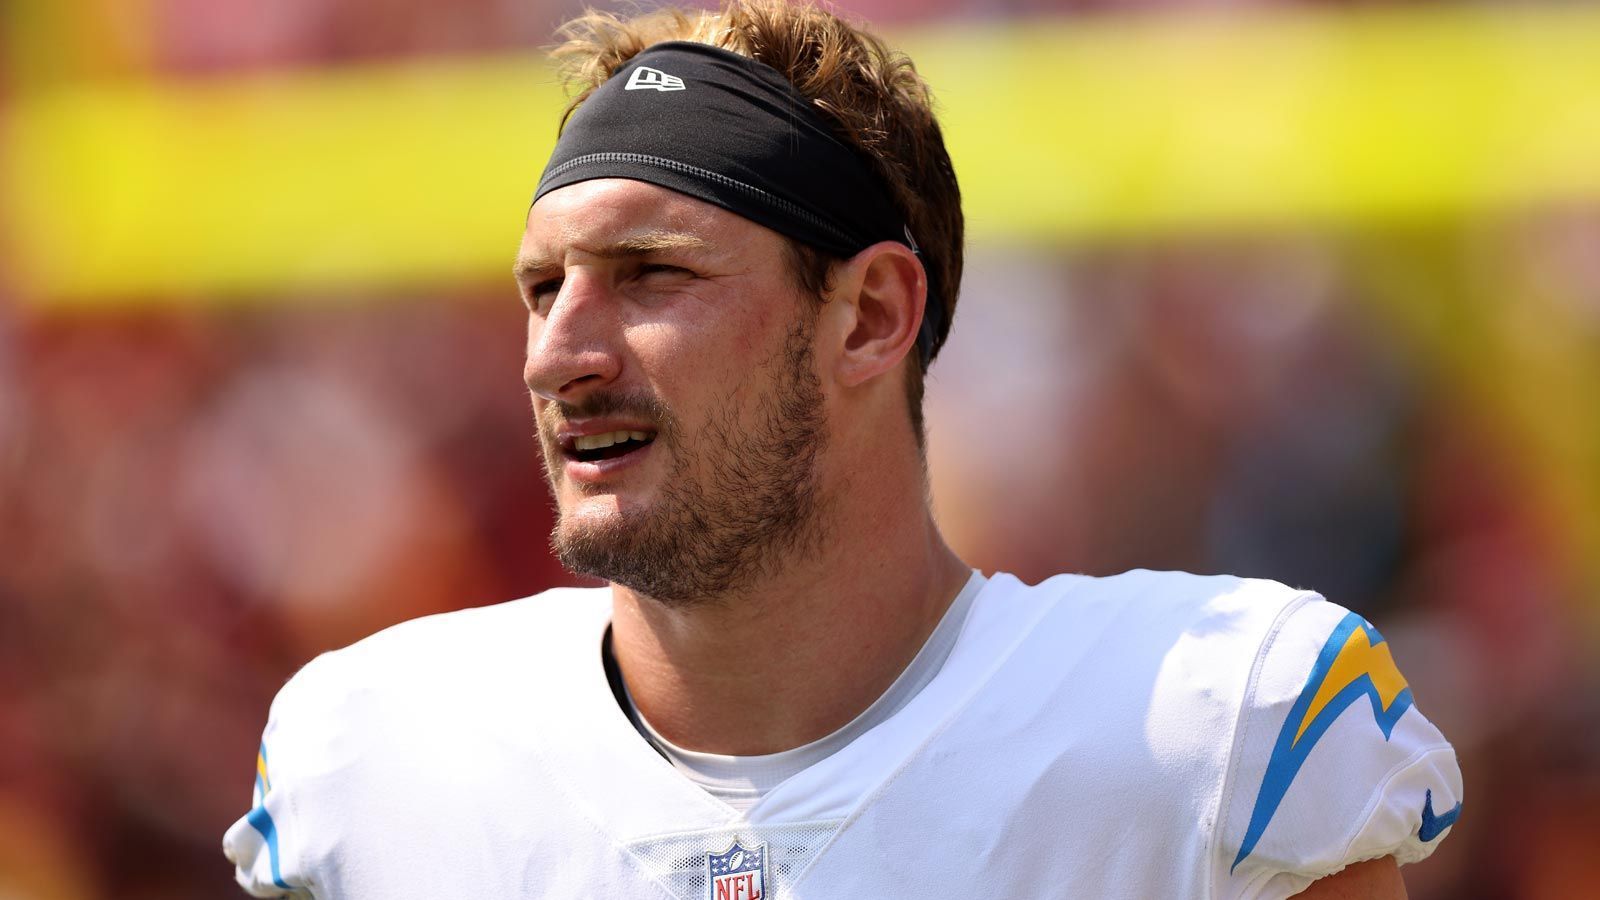 
                <strong>Joey Bosa (Los Angeles Chargers)</strong><br>
                Draftposition: Runde 1/Pick 3 (2016) -Spiele: 72 -Wichtigste Statistiken: 53 Sacks, 197 Tackles -Auszeichnungen/Erfolge: NFL Defensive Rookie of the Year (2016), Pro Bowl (2017, 2019, 2020), CFP National Champion (2014)
              